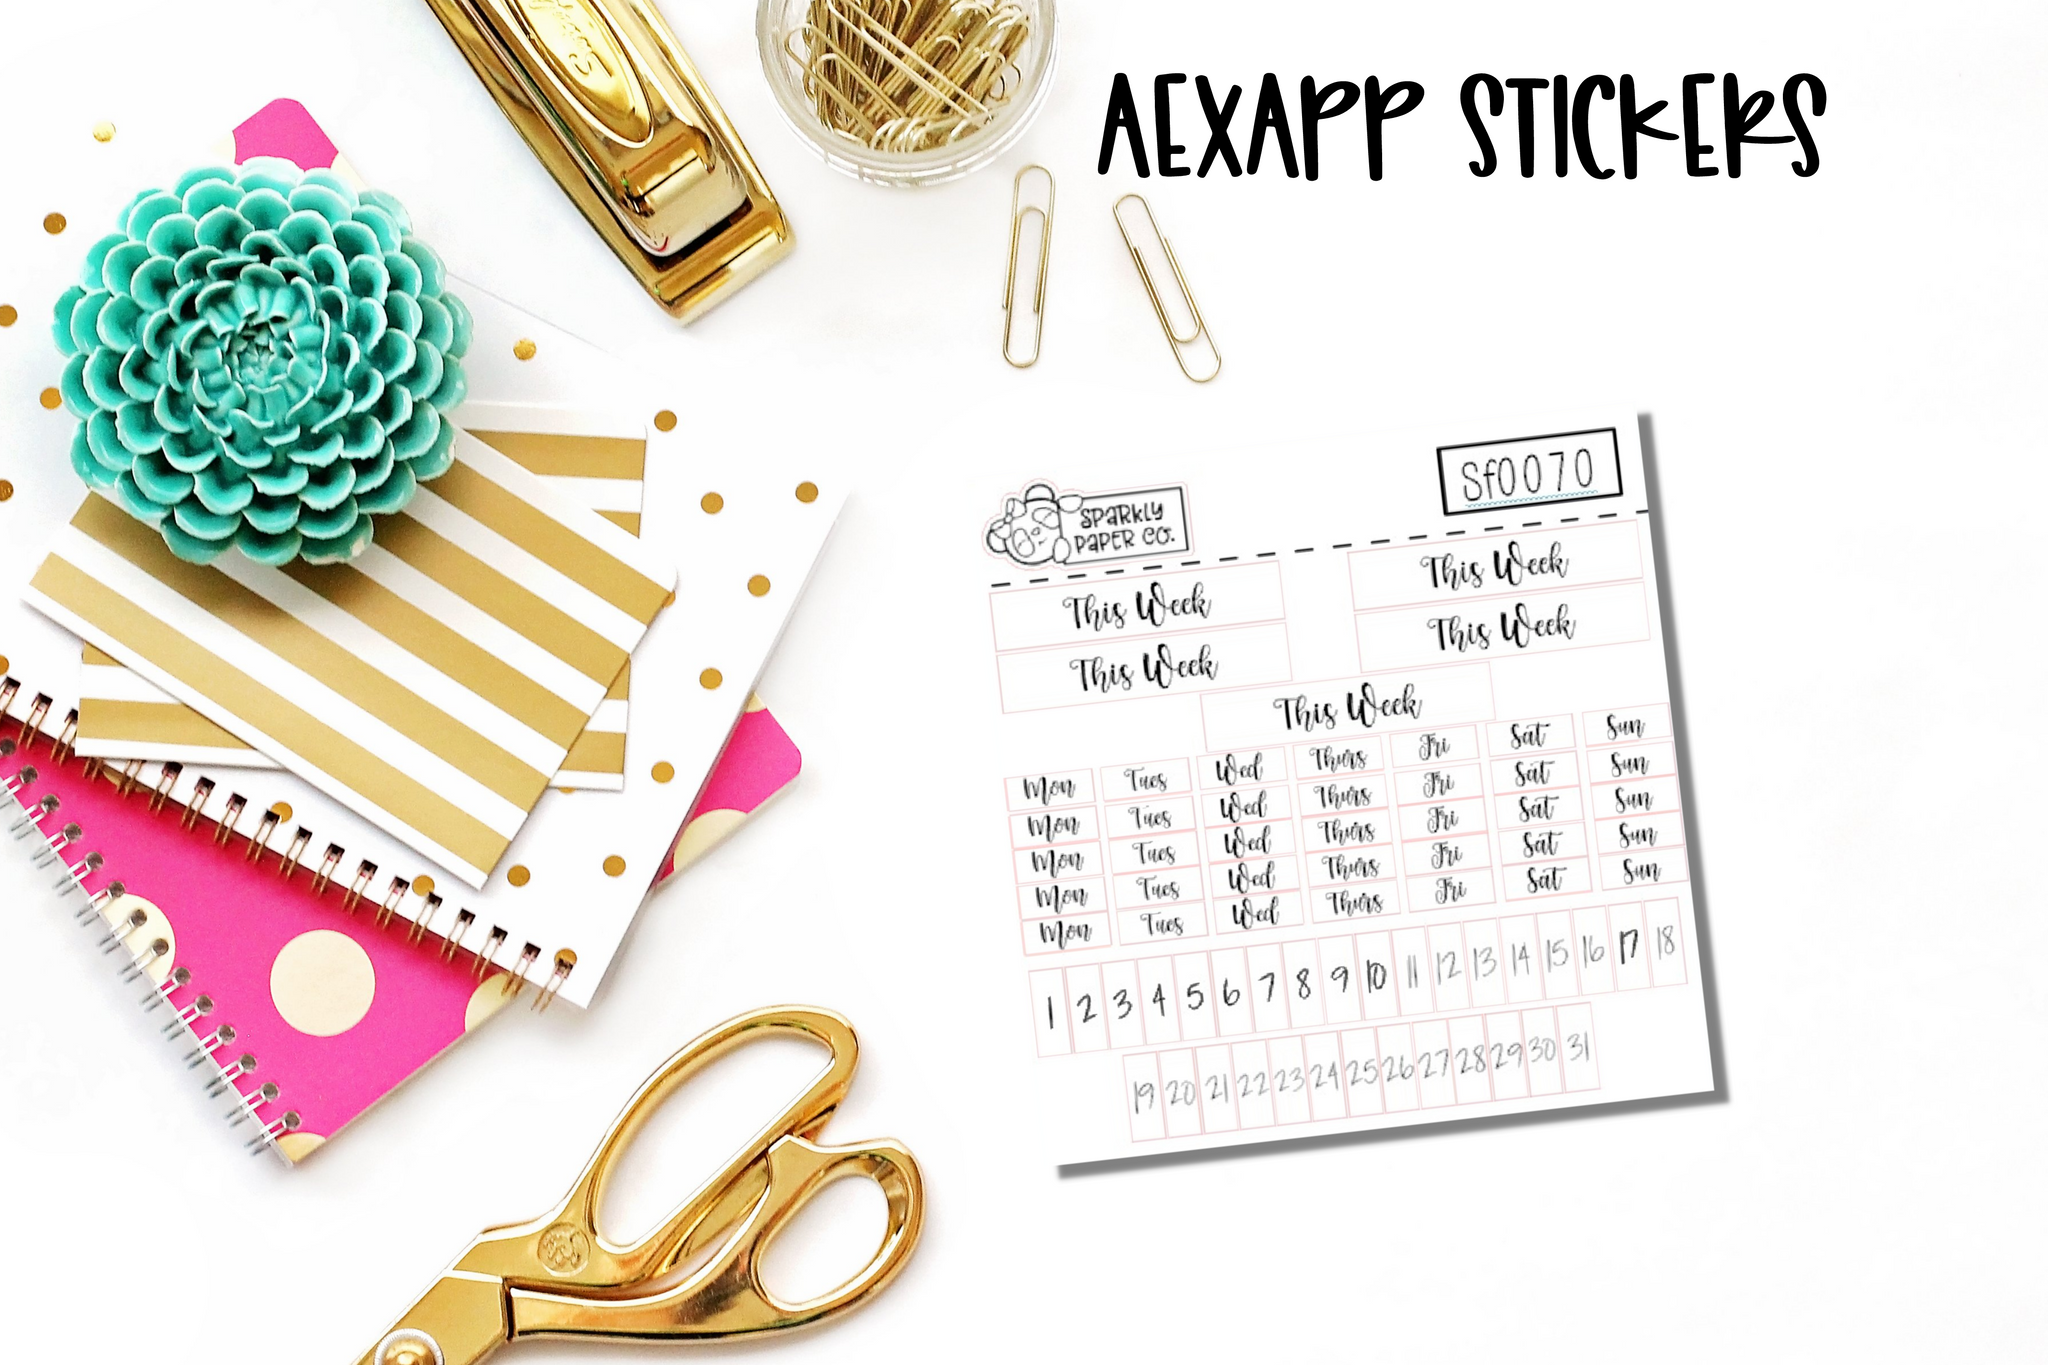 Fancy Font Daily AExAPP Stickers (sf0070)